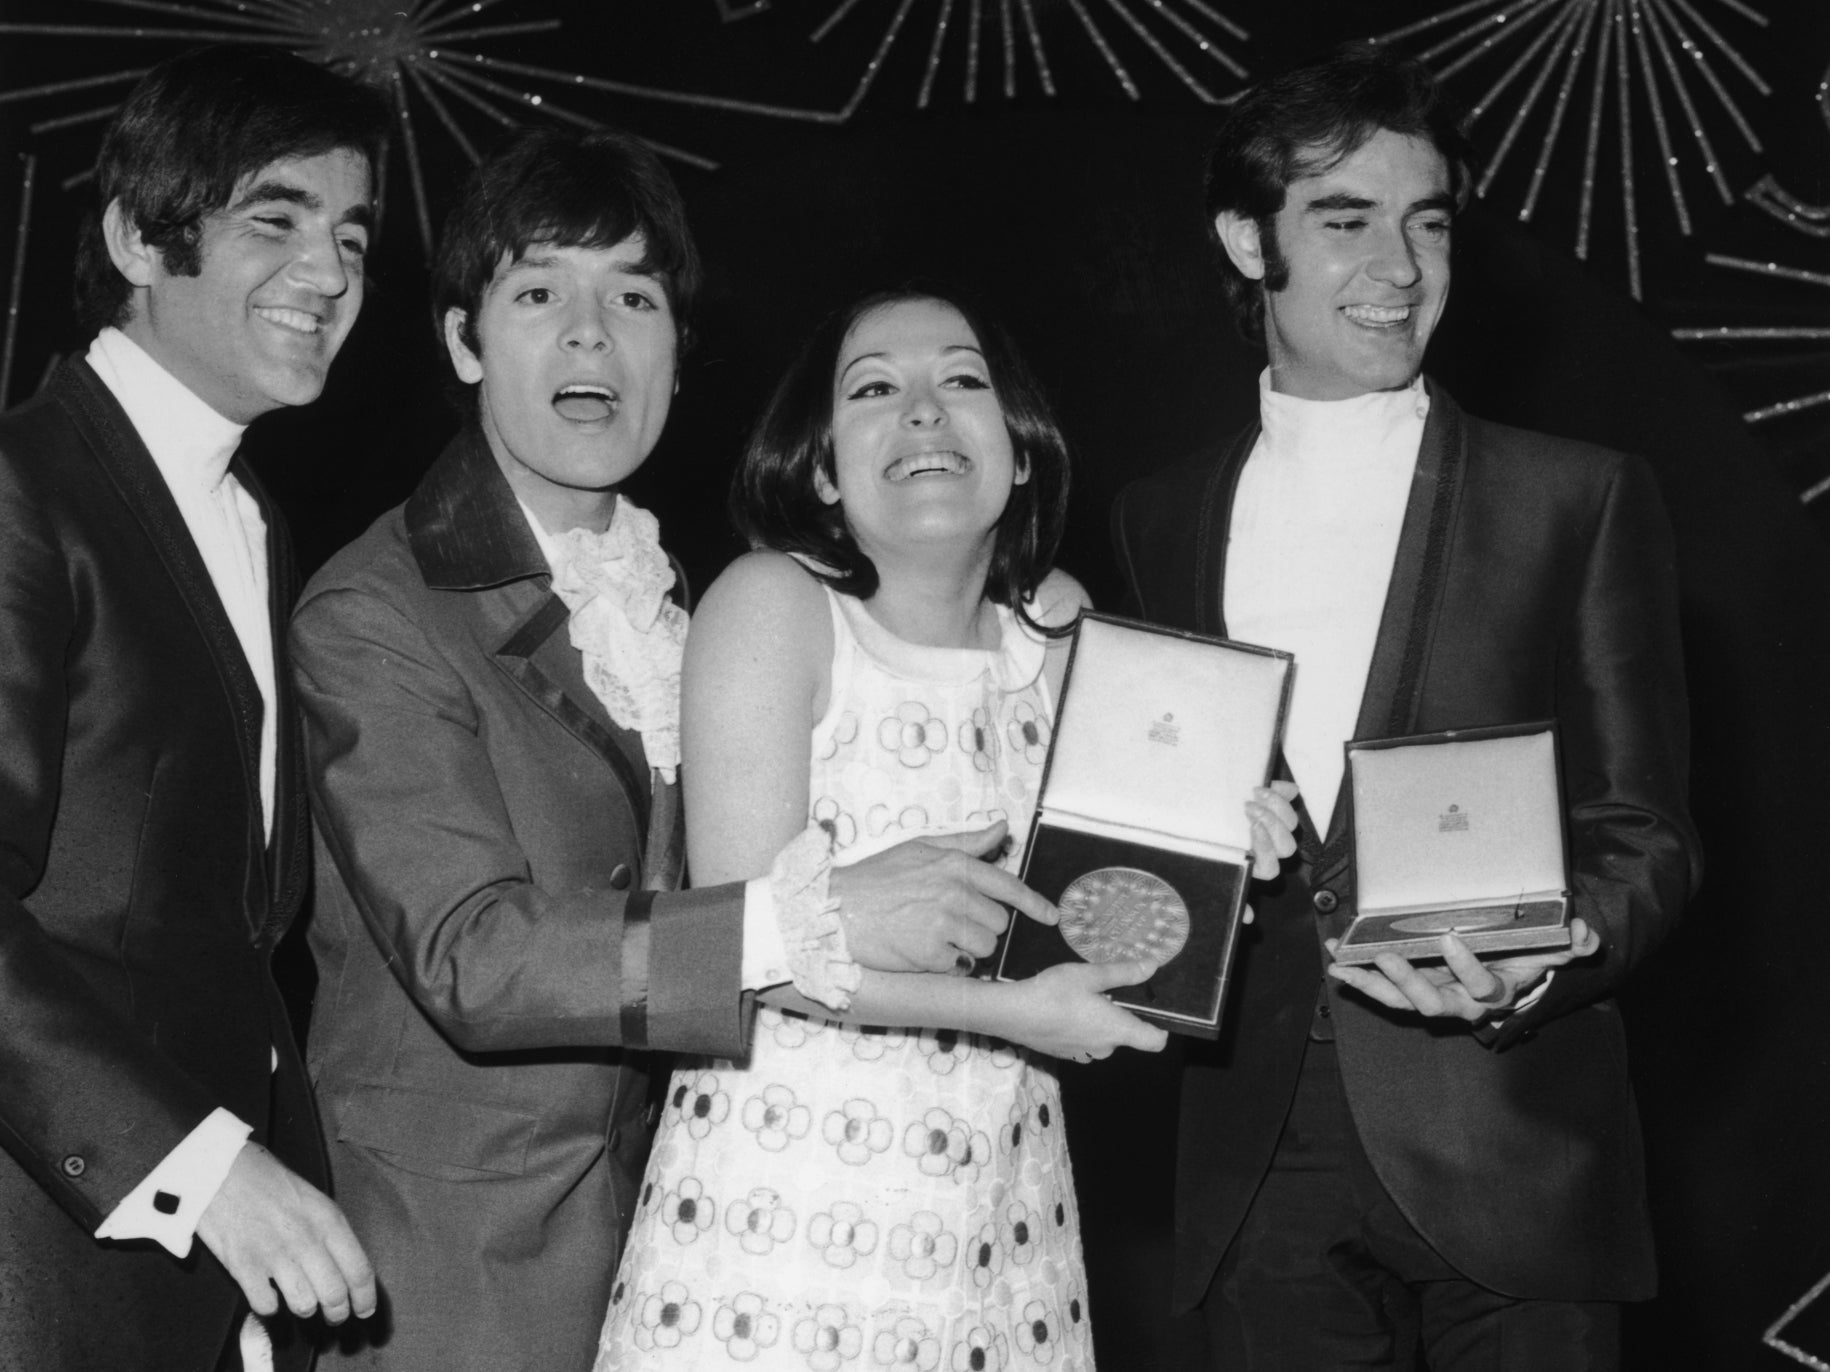 Maissel is congratulated by runner-up Cliff Richard in 1968